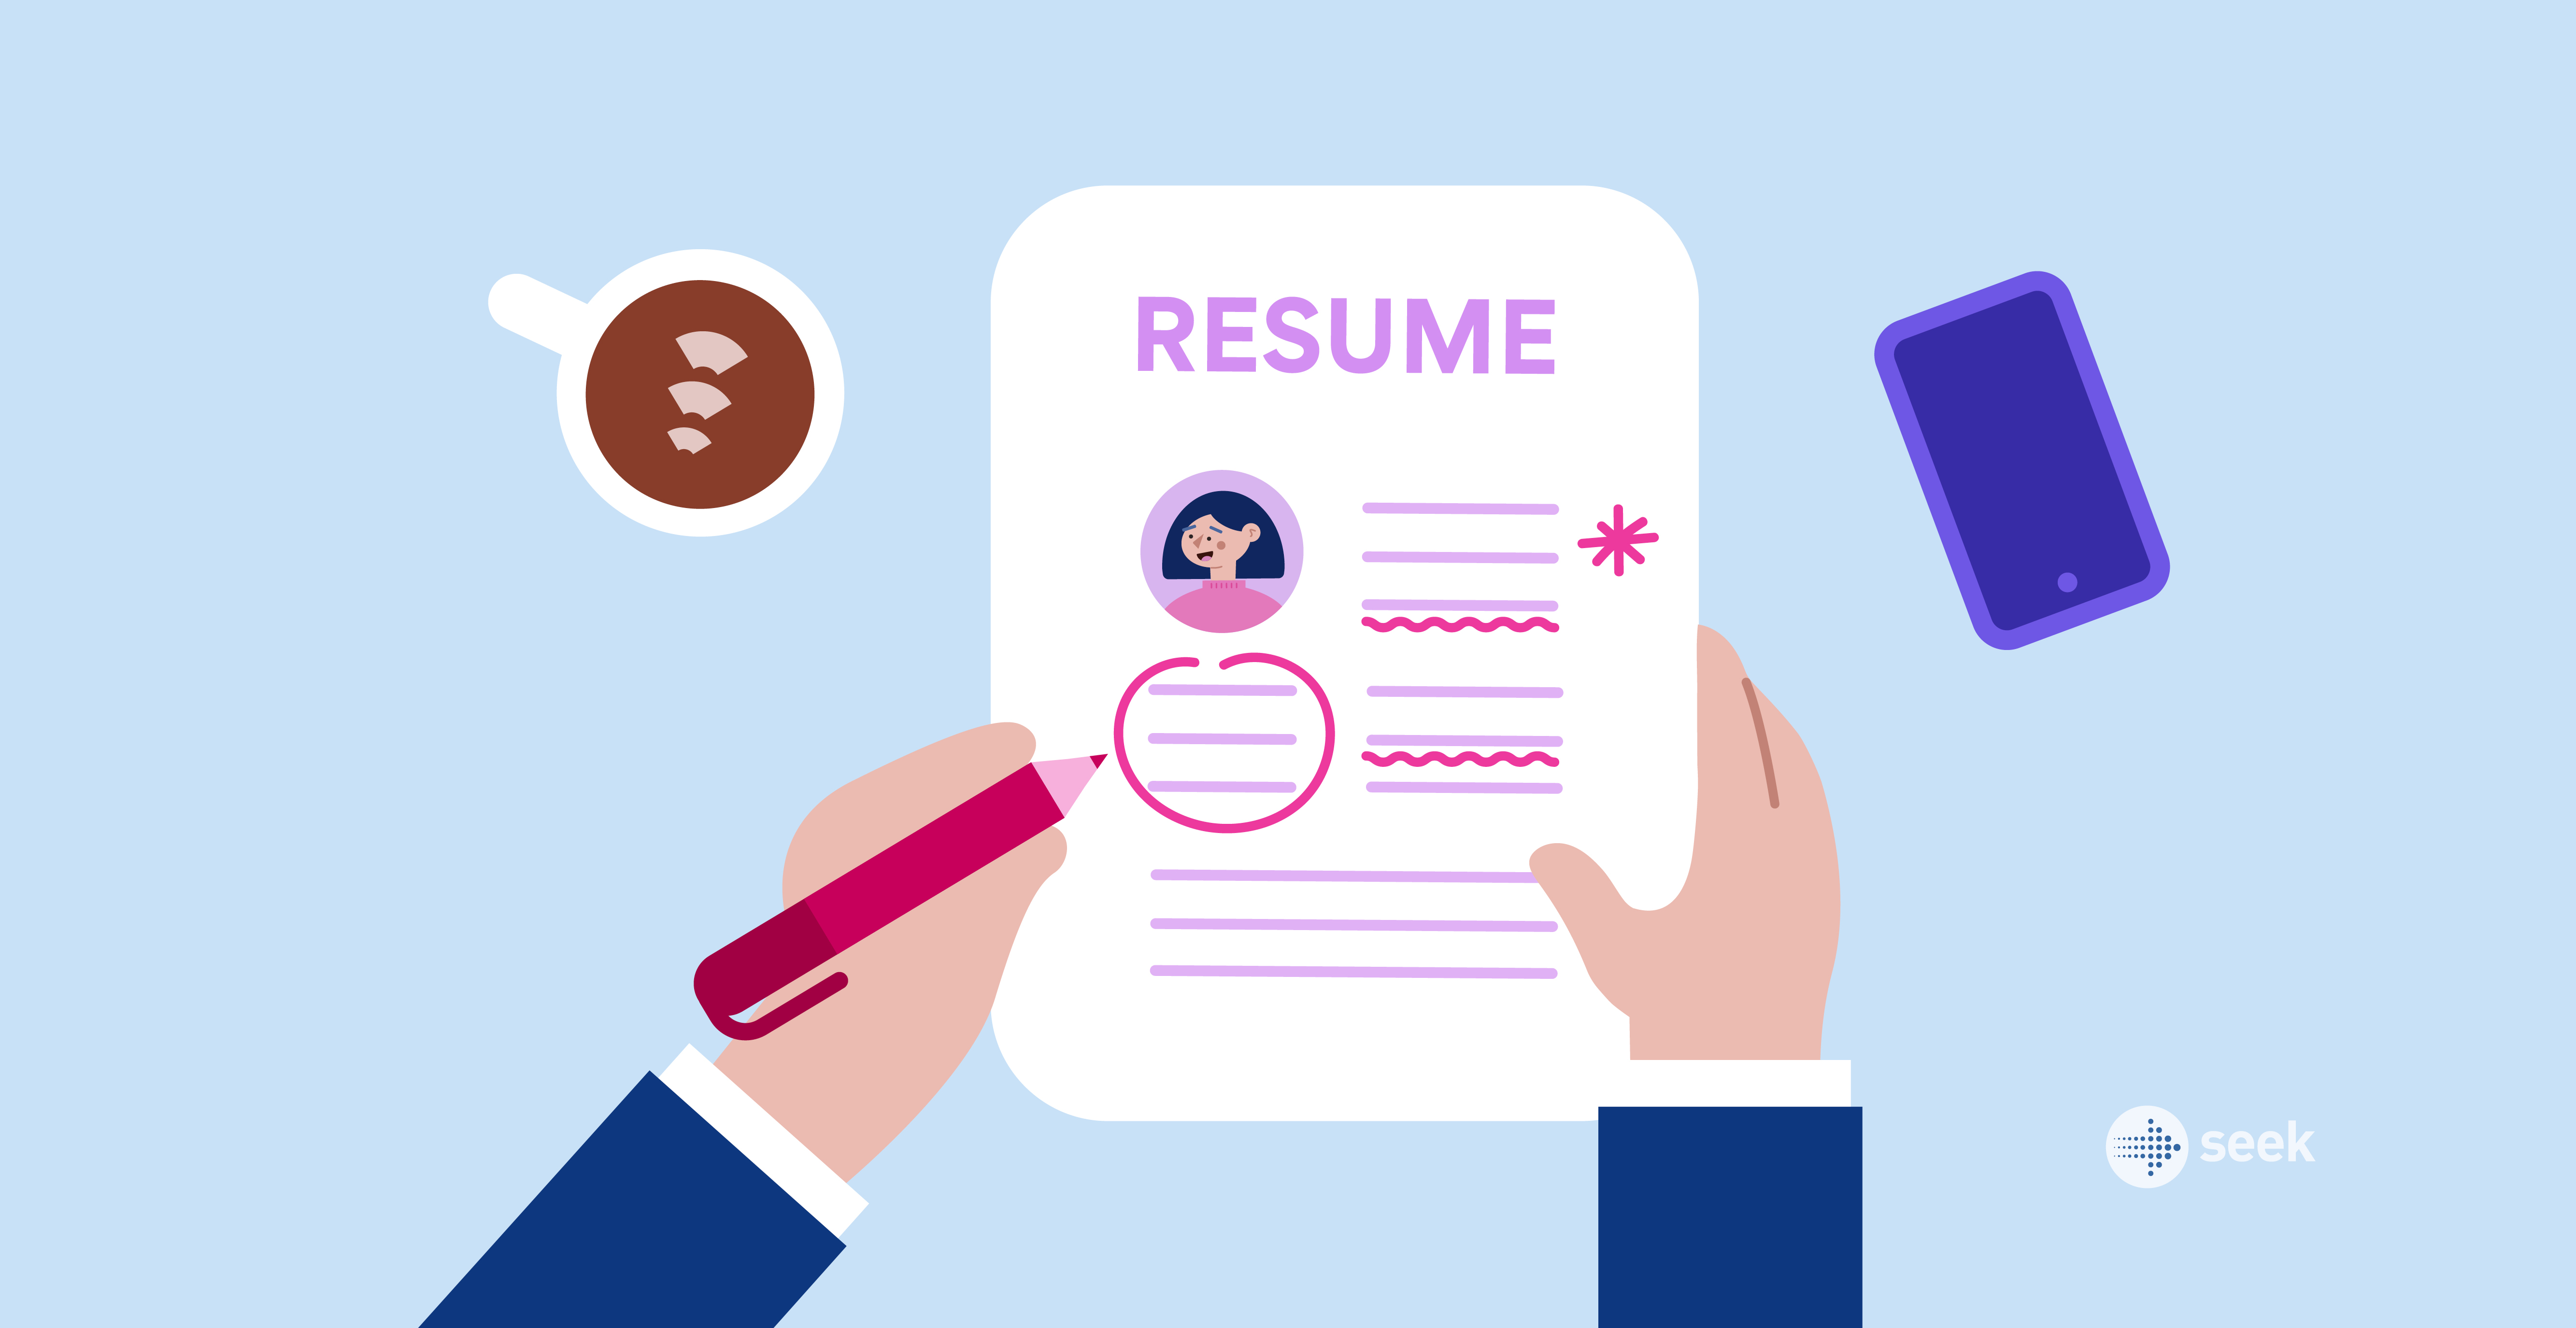 What are professional resumé writing services? 